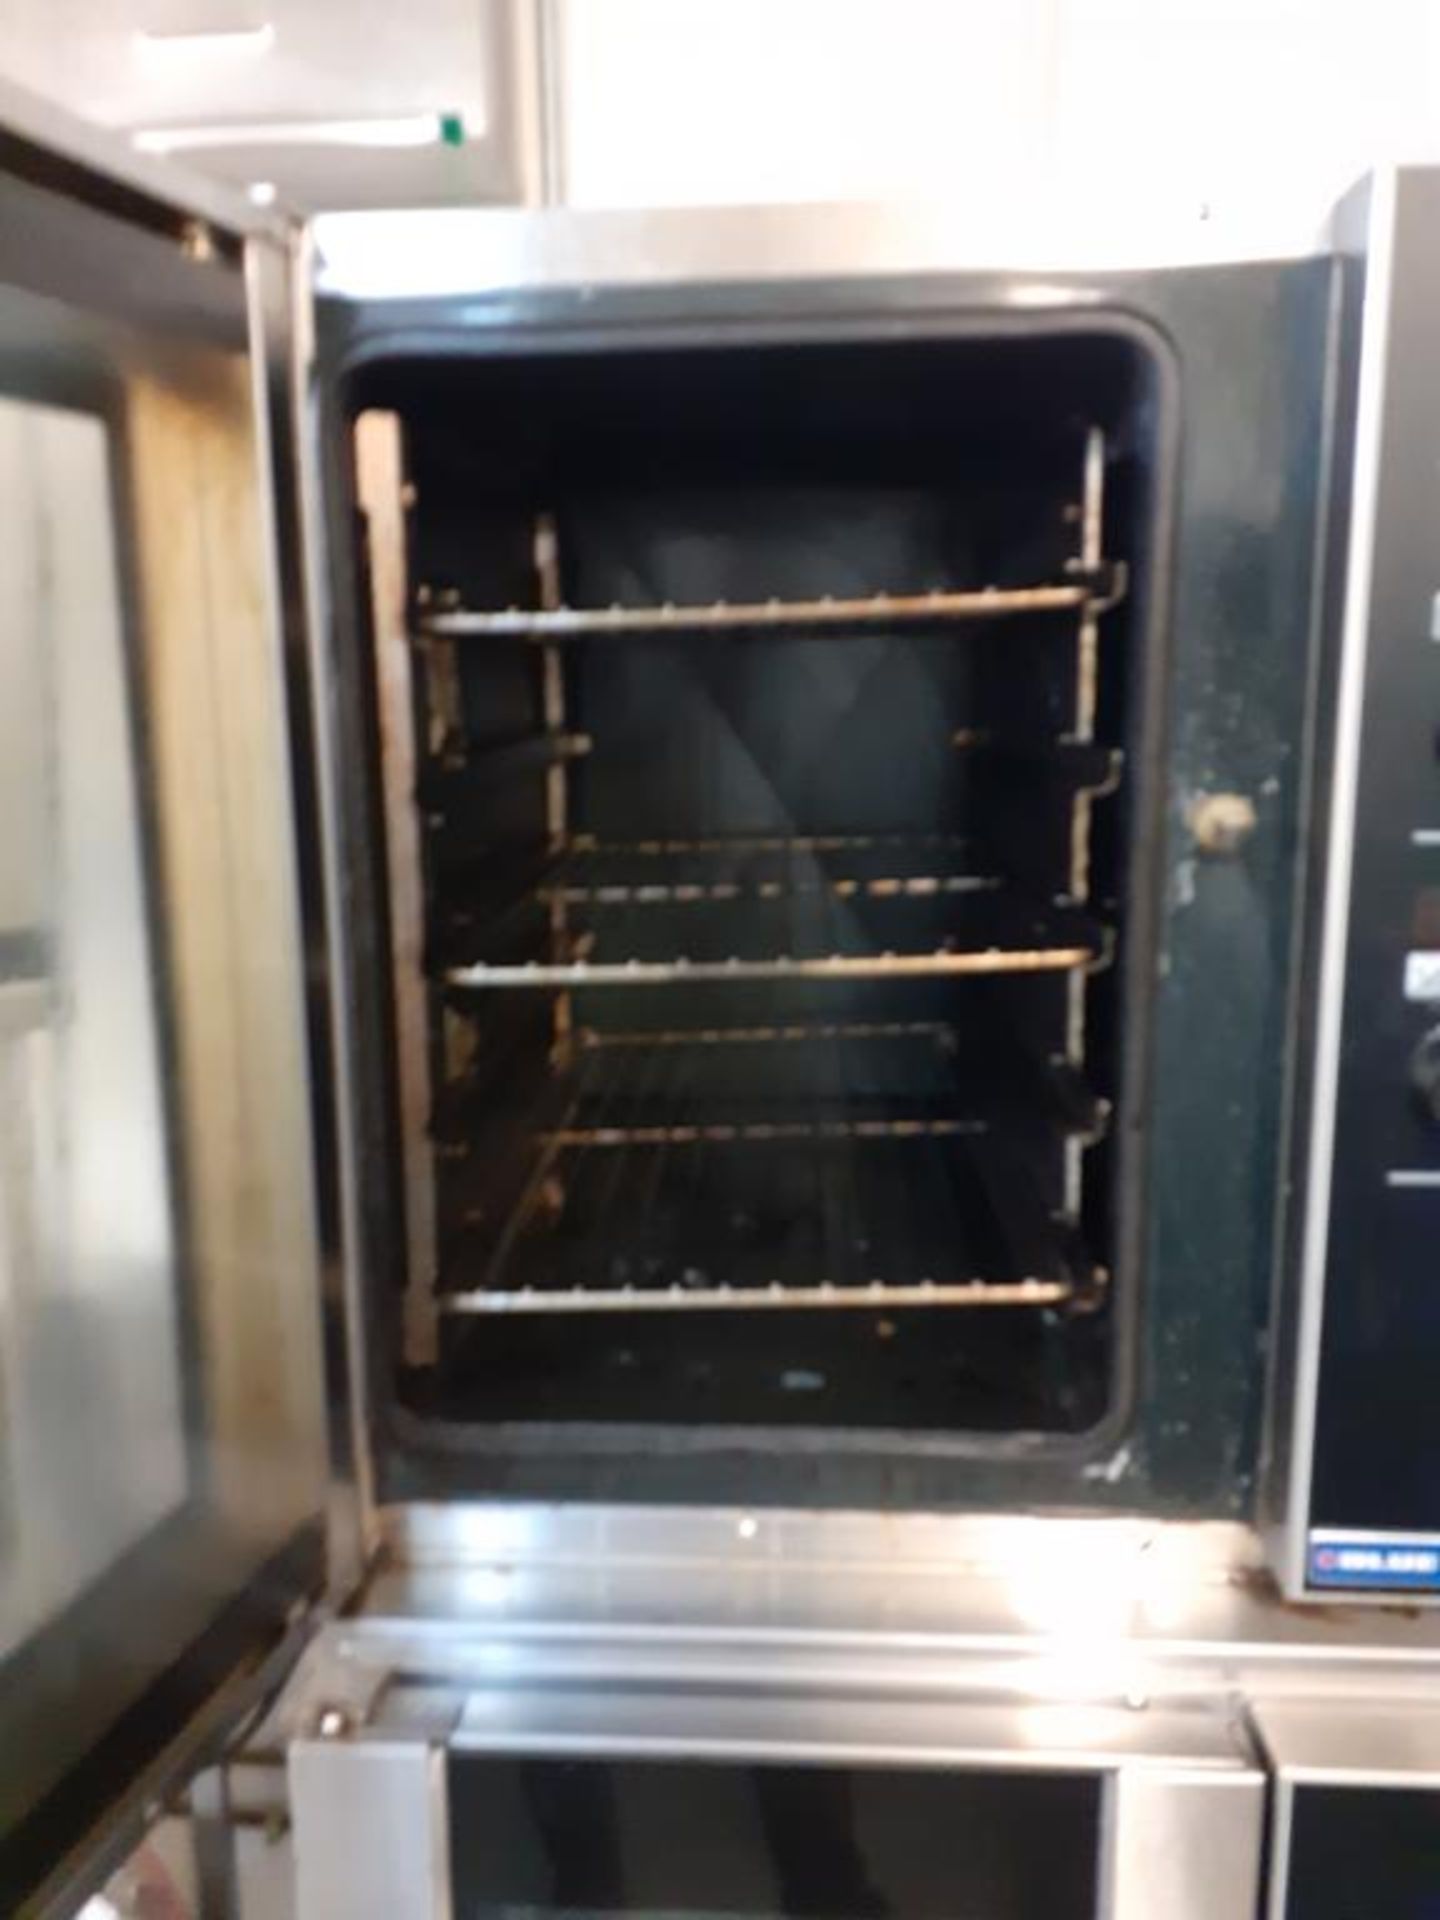 Blue Seal Turbofan E33D5 Electric Convection Oven - Image 2 of 5